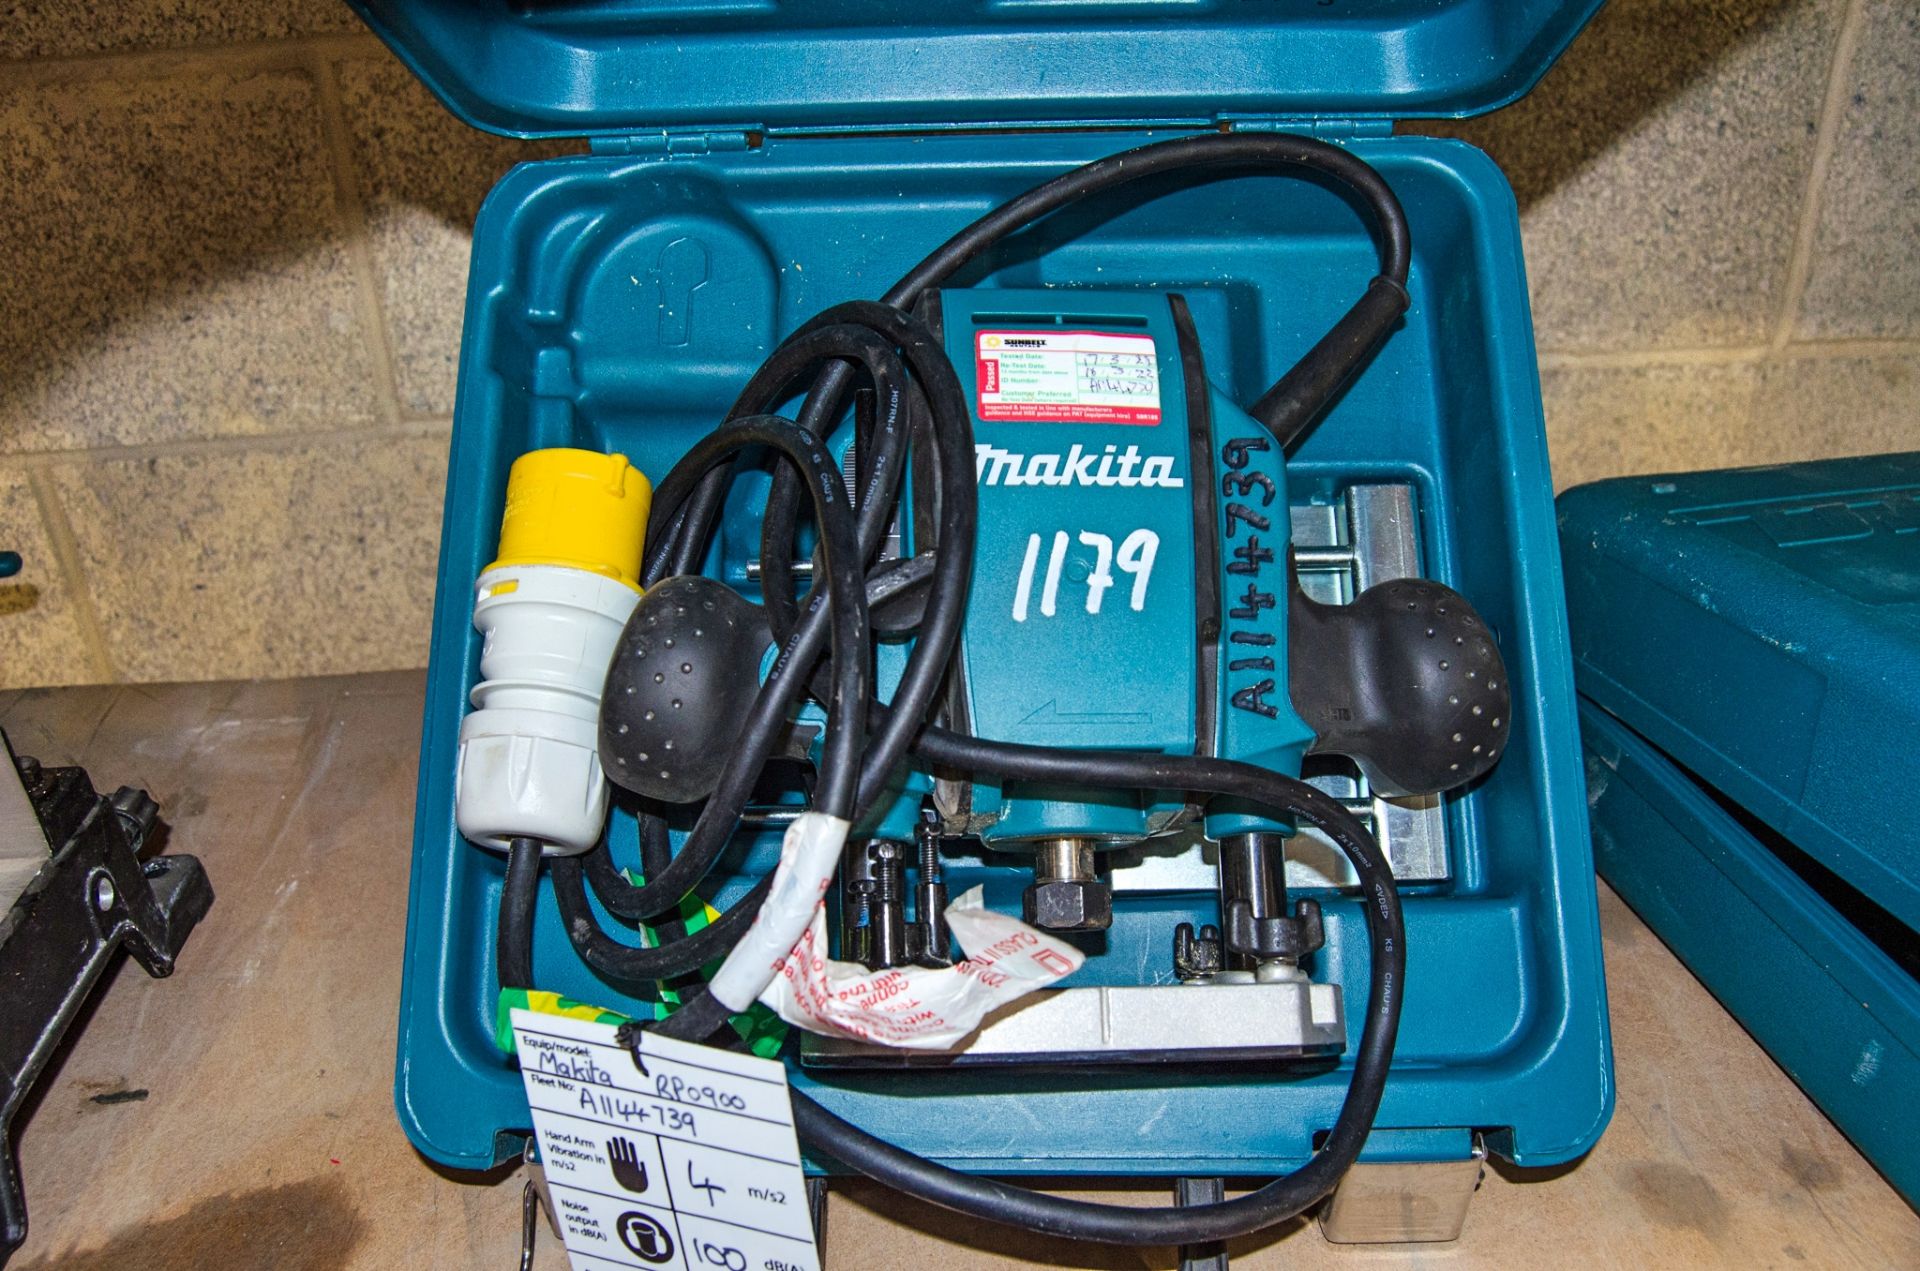 Makita RP0900 110v router c/w carry case A1144739